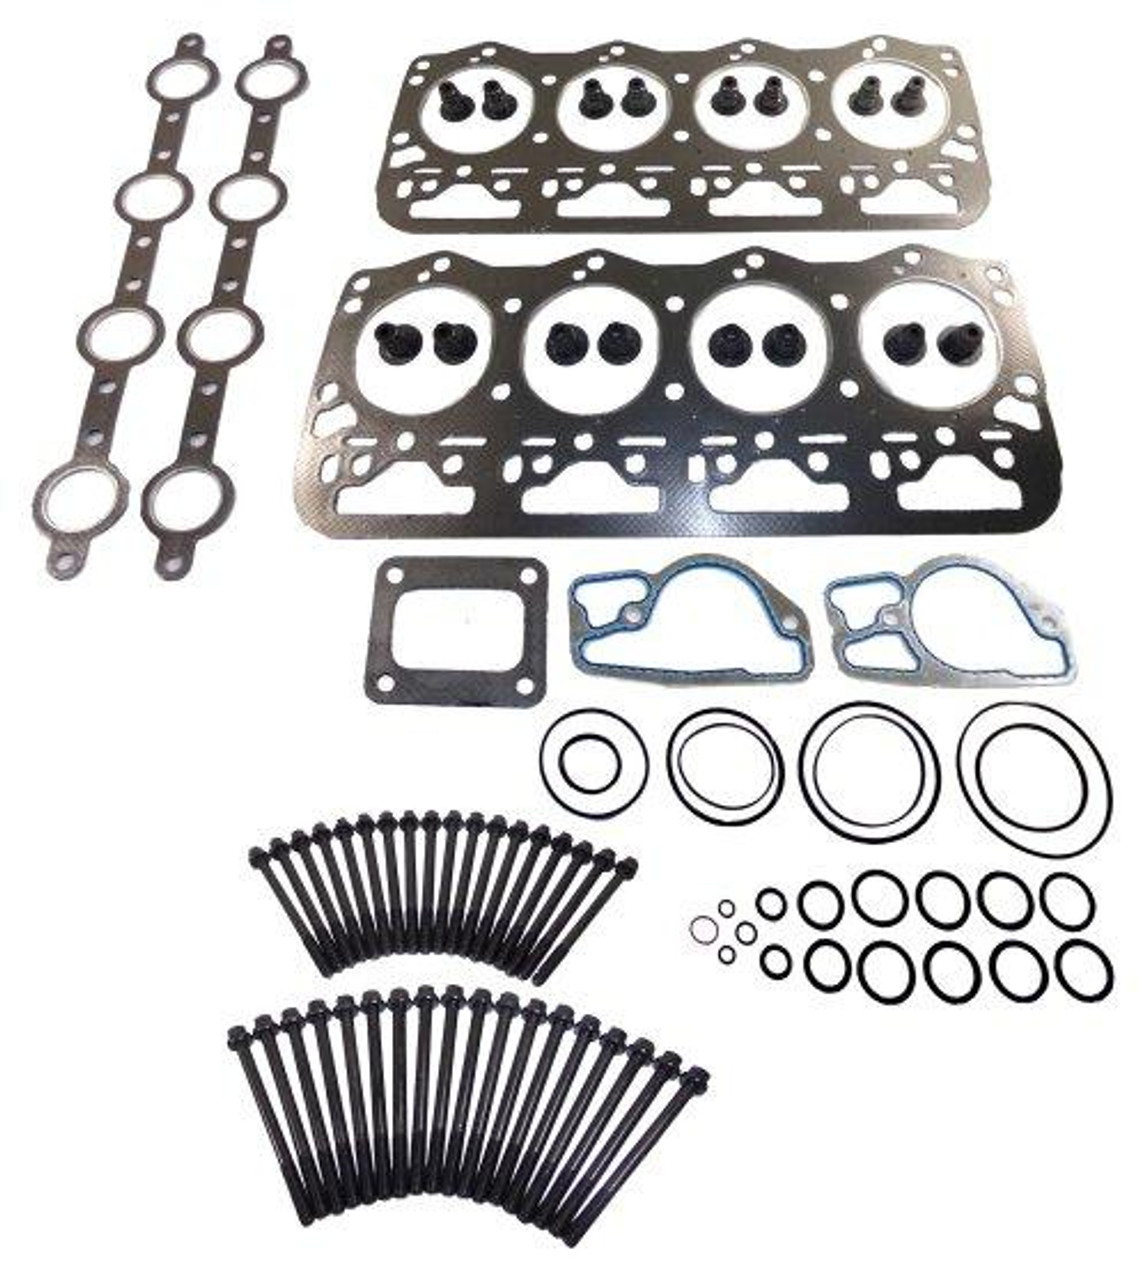 Head Gasket Set with Head Bolt Kit - 1995 Ford F-250 7.3L Engine Parts # HGB4200ZE44